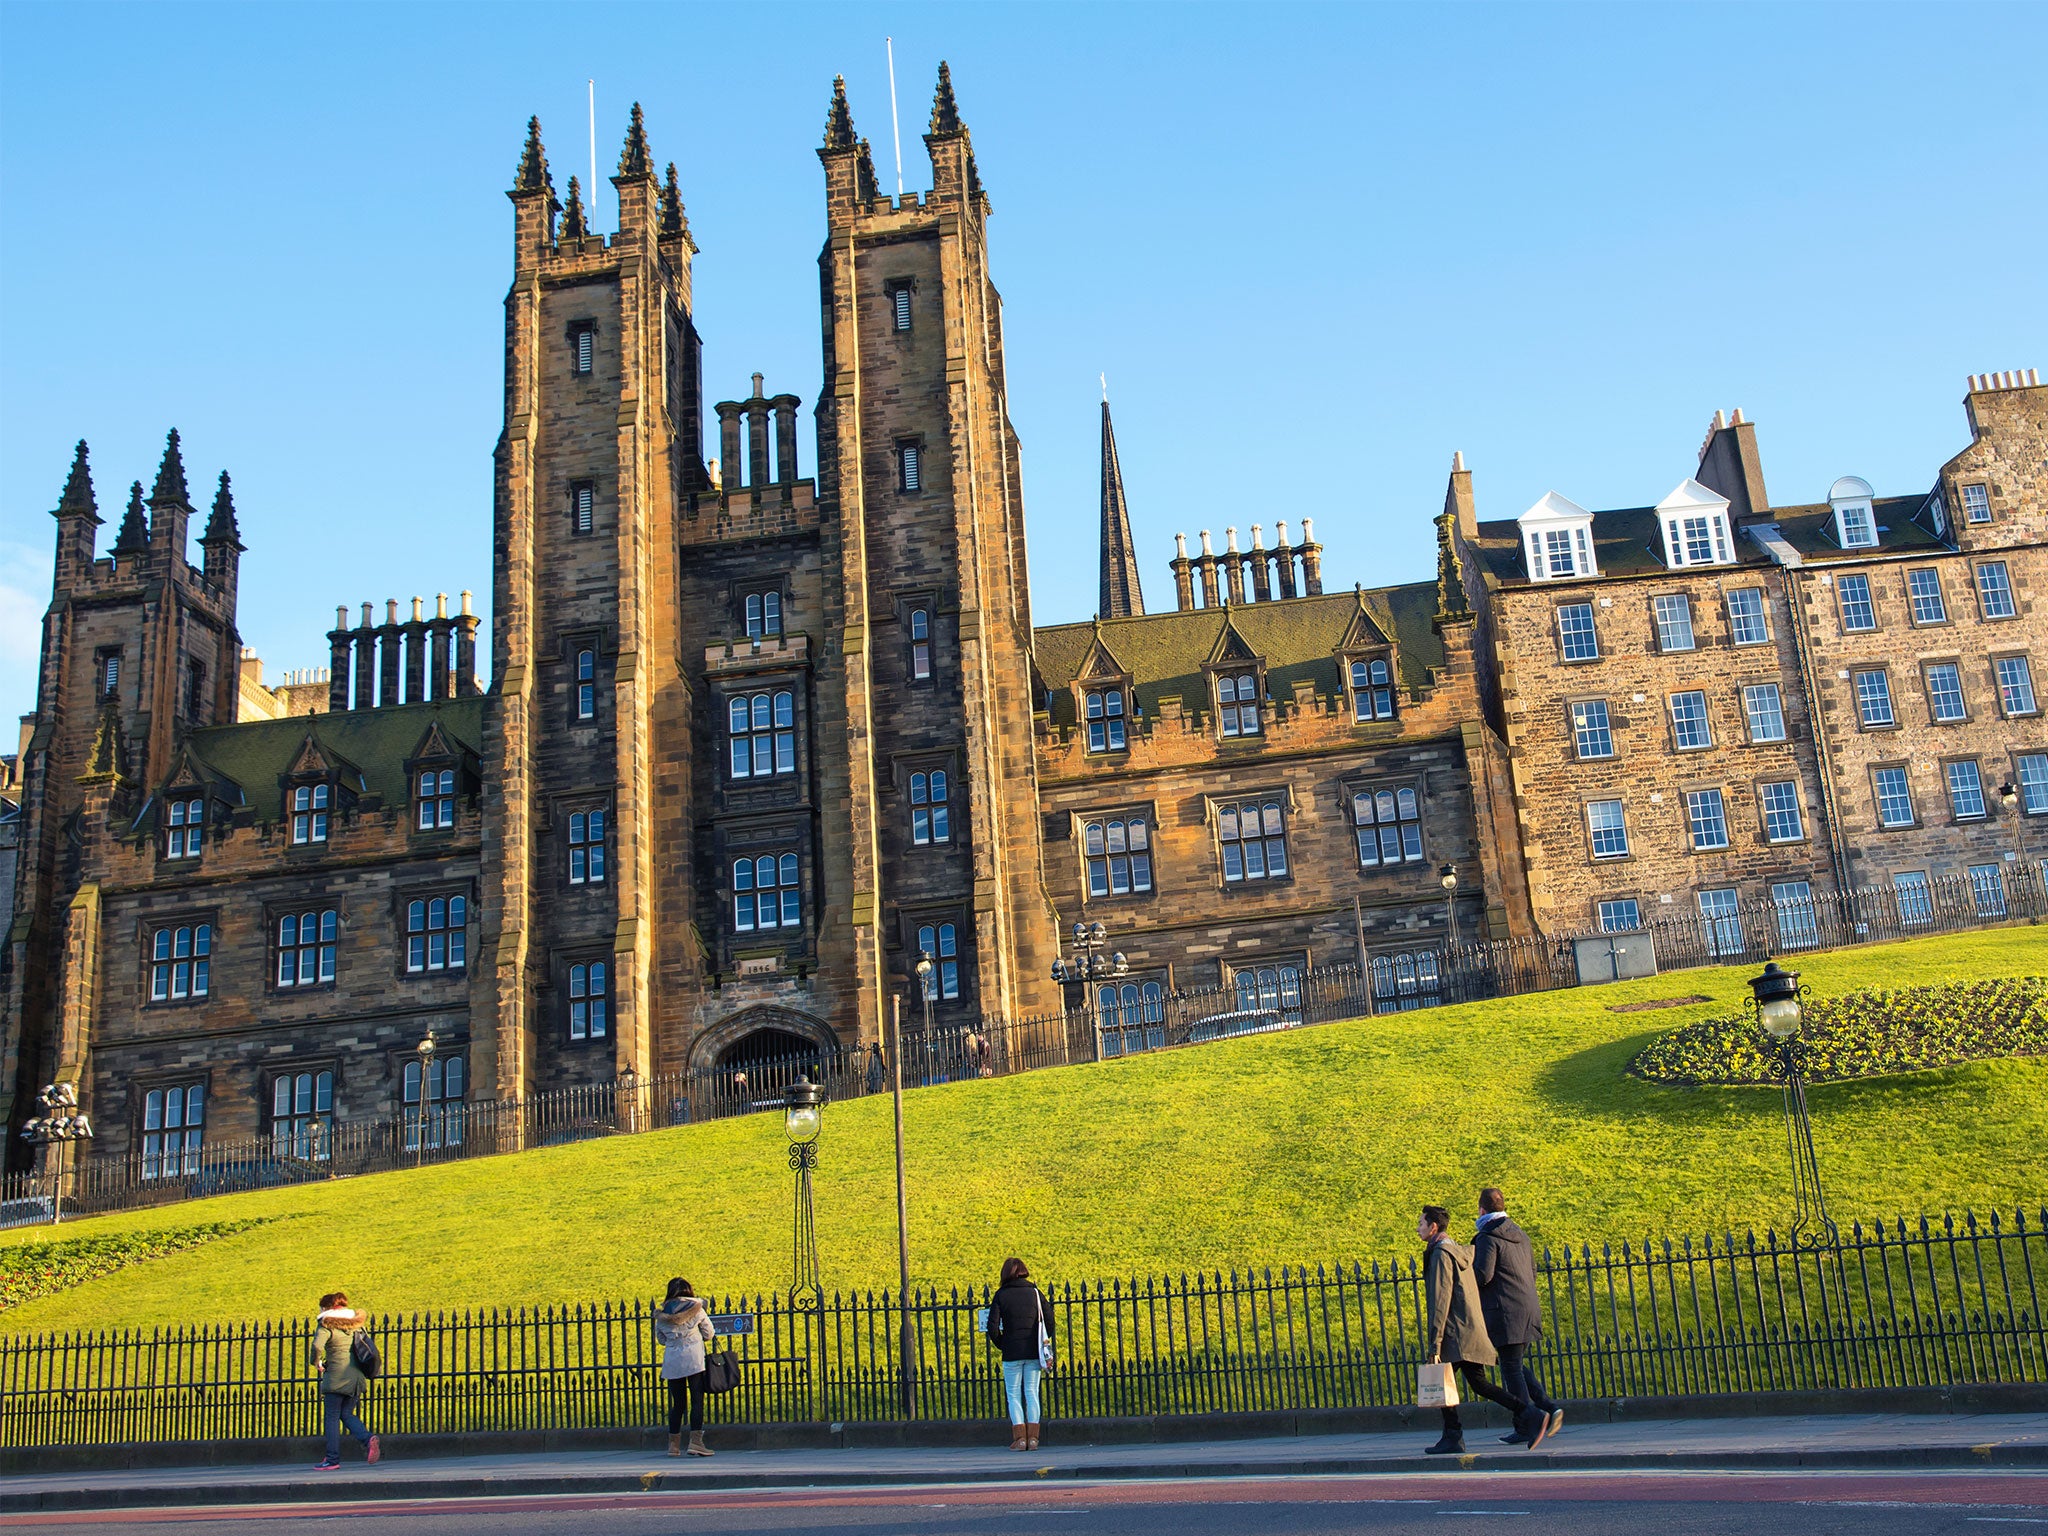 Unlike students elsewhere in the UK, Scottish students are not required to pay tuition fees when attending Scottish institutions, such as Edinburgh Univeristy